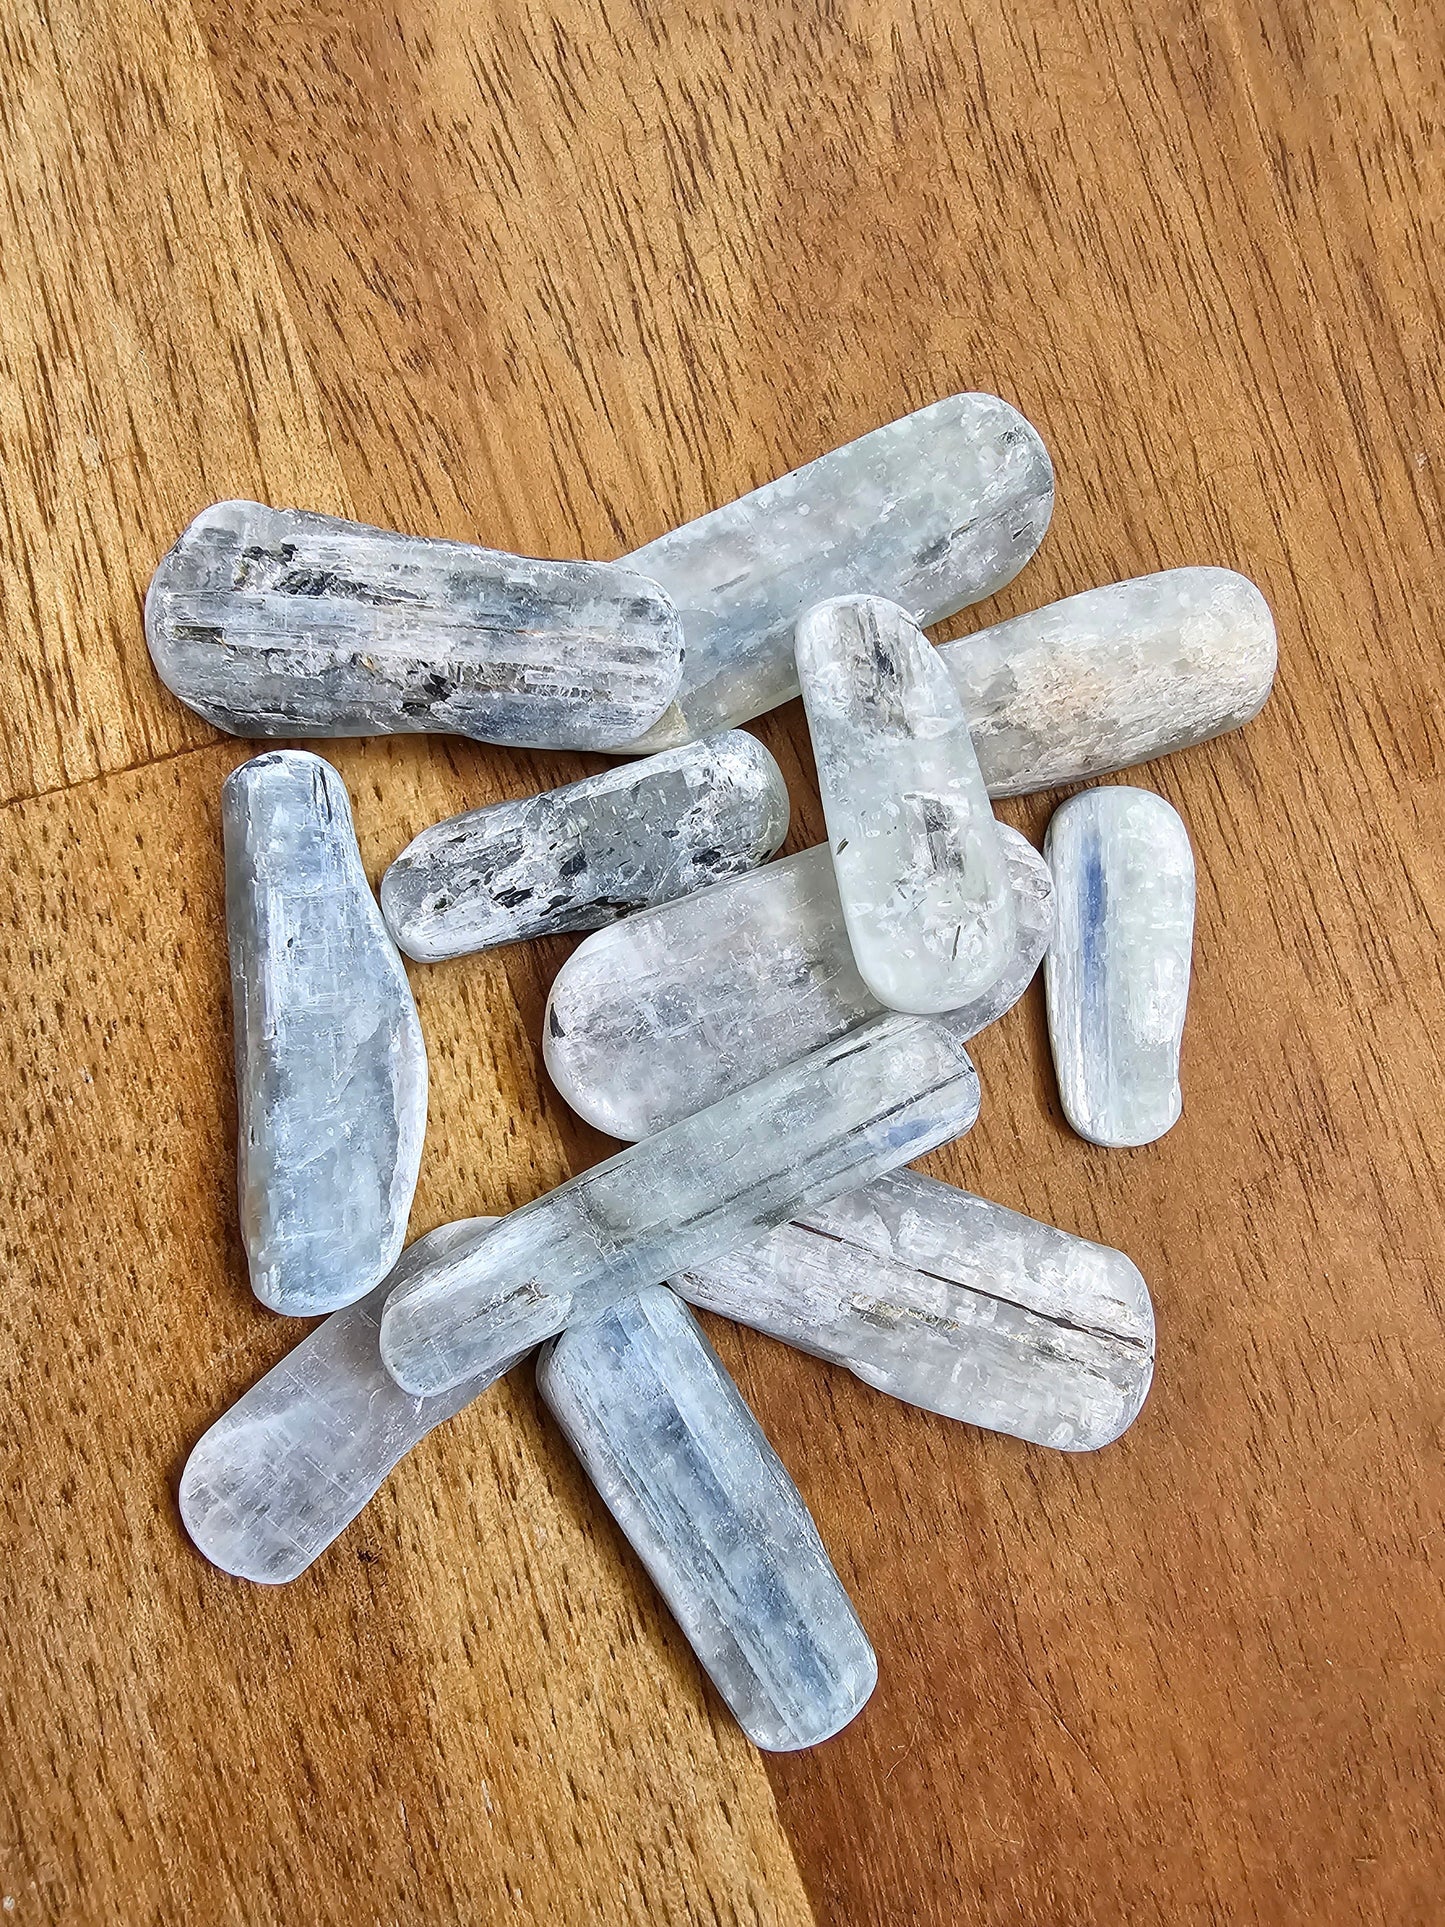 Australian Sikh Kyanite Blade with mica inclusions